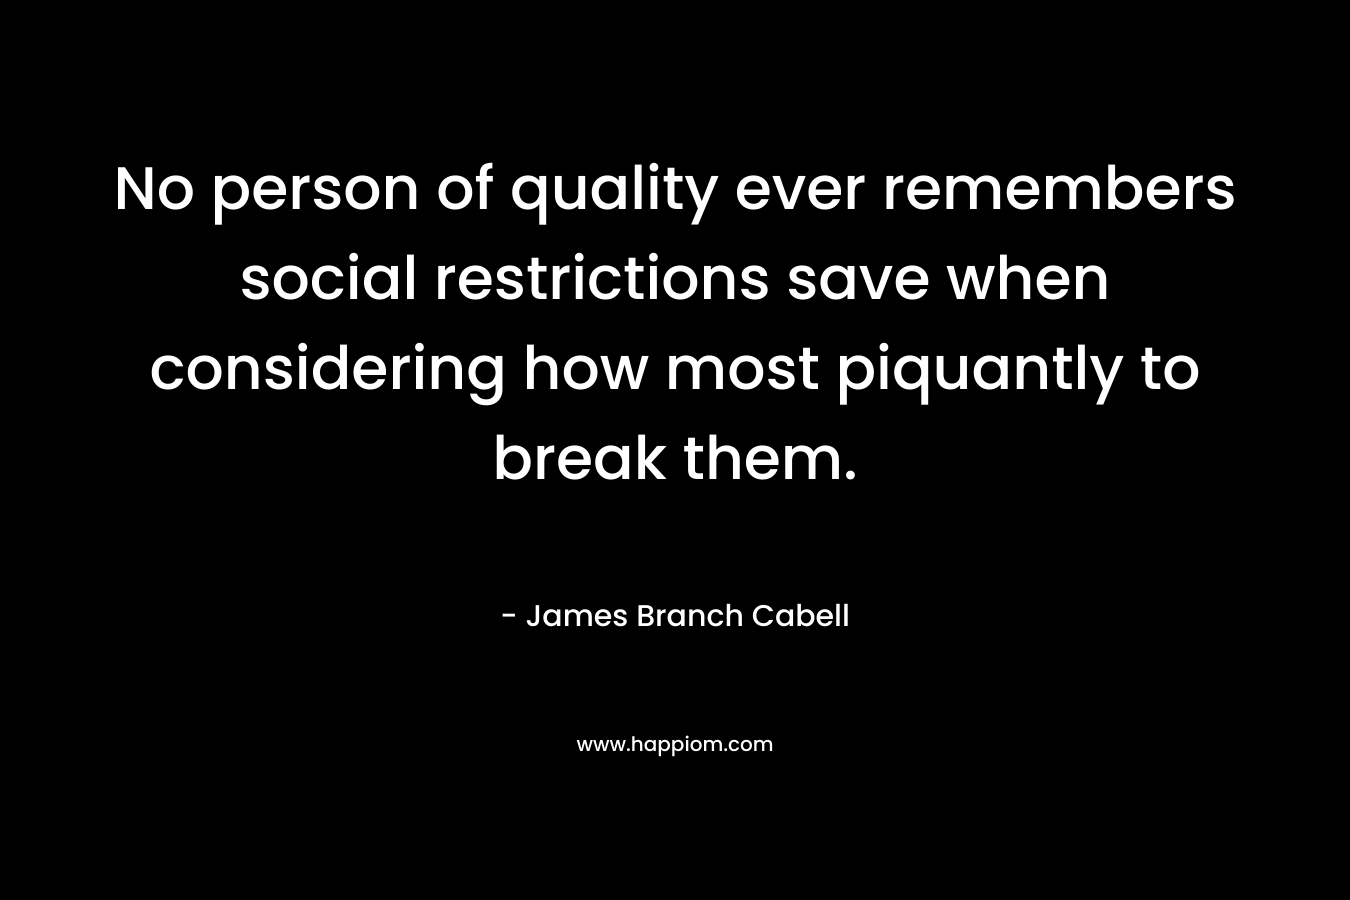 No person of quality ever remembers social restrictions save when considering how most piquantly to break them. – James Branch Cabell